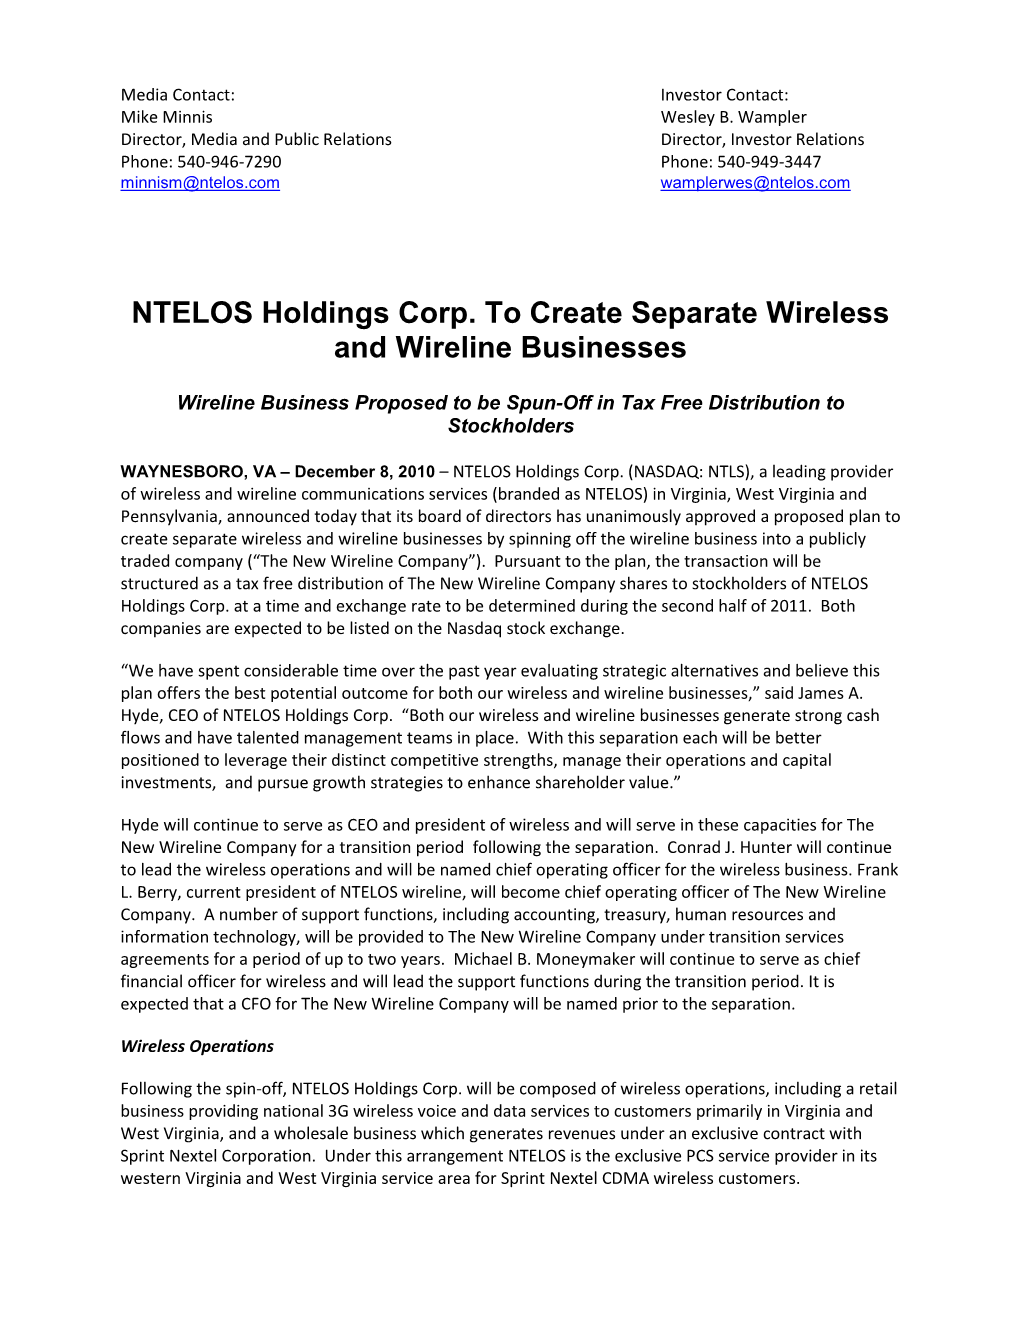 NTELOS Holdings Corp. to Create Separate Wireless and Wireline Businesses